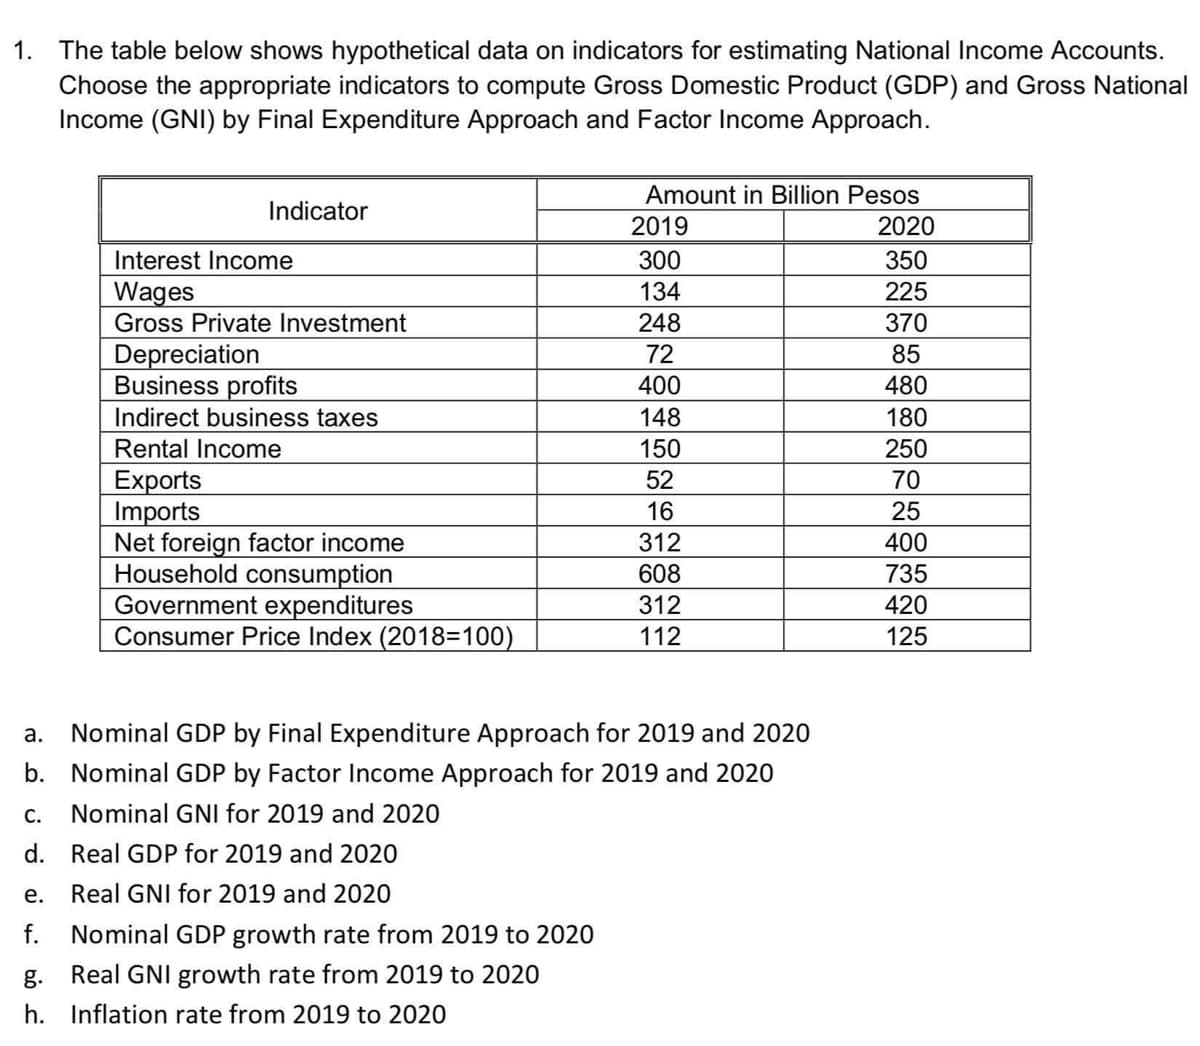 1. The table below shows hypothetical data on indicators for estimating National Income Accounts.
Choose the appropriate indicators to compute Gross Domestic Product (GDP) and Gross National
Income (GNI) by Final Expenditure Approach and Factor Income Approach.
Amount in Billion Pesos
Indicator
2019
2020
Interest Income
300
350
Wages
Gross Private Investment
134
225
248
370
Depreciation
Business profits
72
85
400
480
Indirect business taxes
148
180
Rental Income
Exports
Imports
Net foreign factor income
Household consumption
Government expenditures
Consumer Price Index (2018=100)
150
250
52
70
16
25
312
400
608
735
312
420
112
125
а.
Nominal GDP by Final Expenditure Approach for 2019 and 2020
b. Nominal GDP by Factor Income Approach for 2019 and 2020
С.
Nominal GNI for 2019 and 2020
d. Real GDP for 2019 and 2020
е.
Real GNI for 2019 and 2020
f.
Nominal GDP growth rate from 2019 to 2020
g.
Real GNI growth rate from 2019 to 2020
h. Inflation rate from 2019 to 2020
